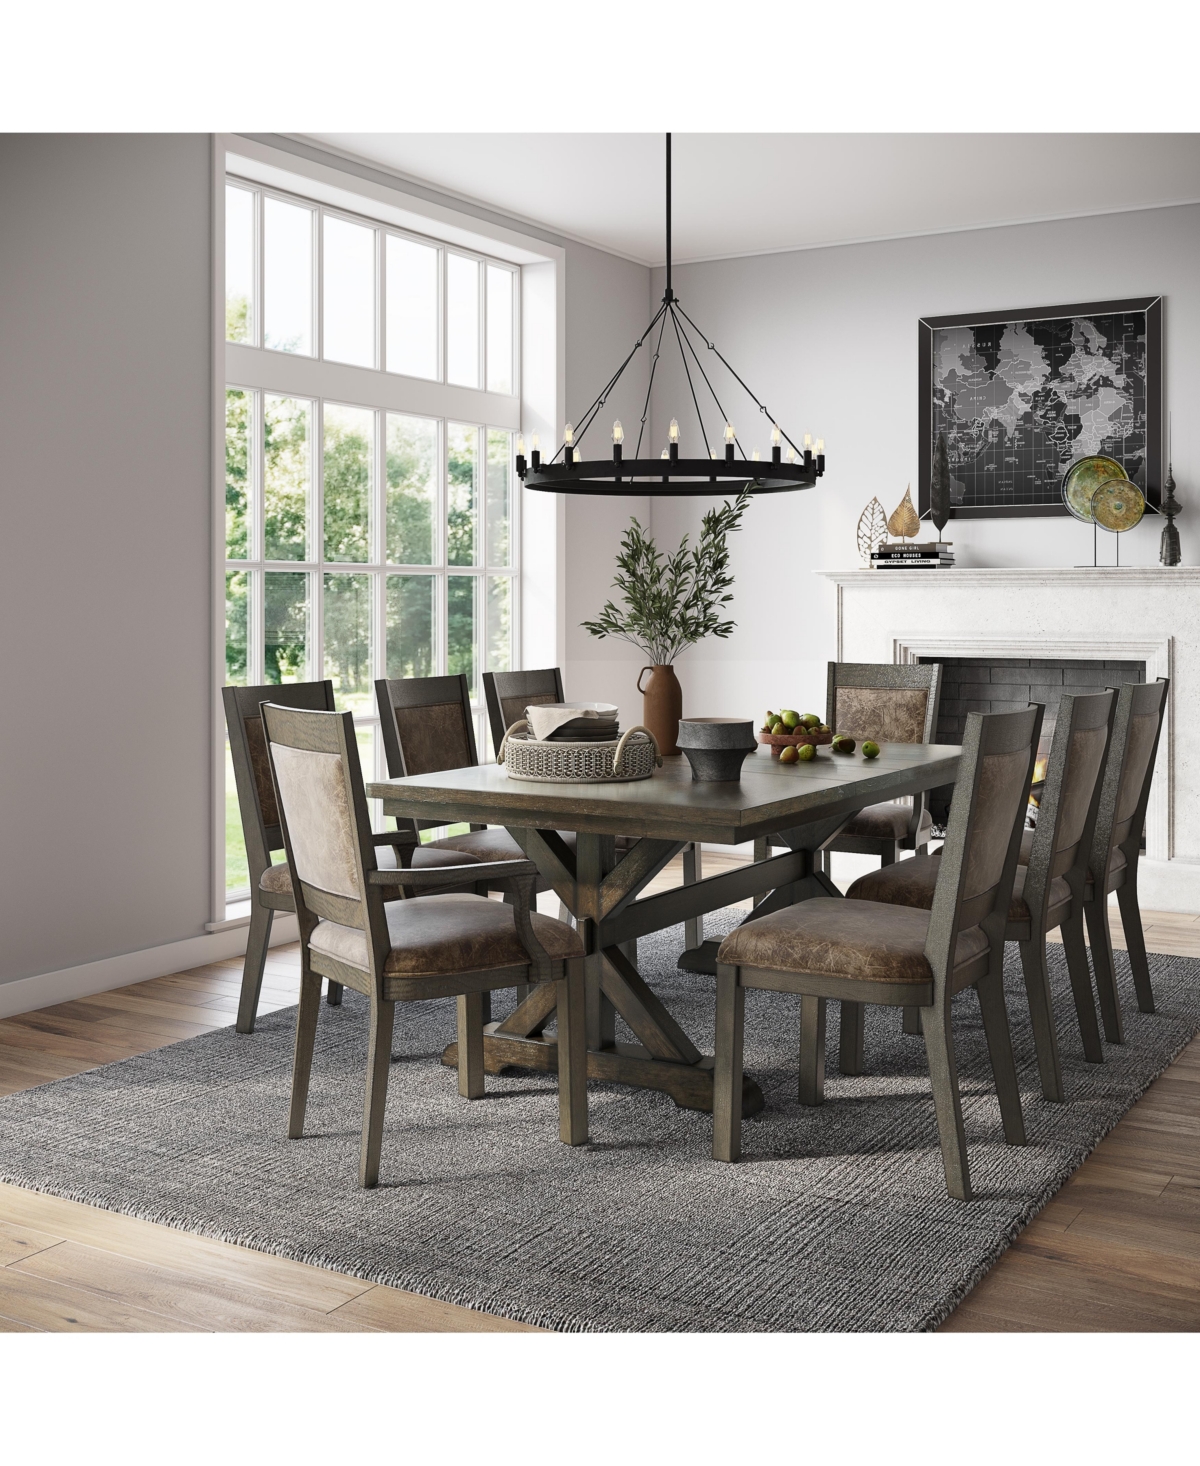 Denman Dining 9-Pc Set (Trestle Table + 6 Side Chairs+ 2 Arm Chairs)